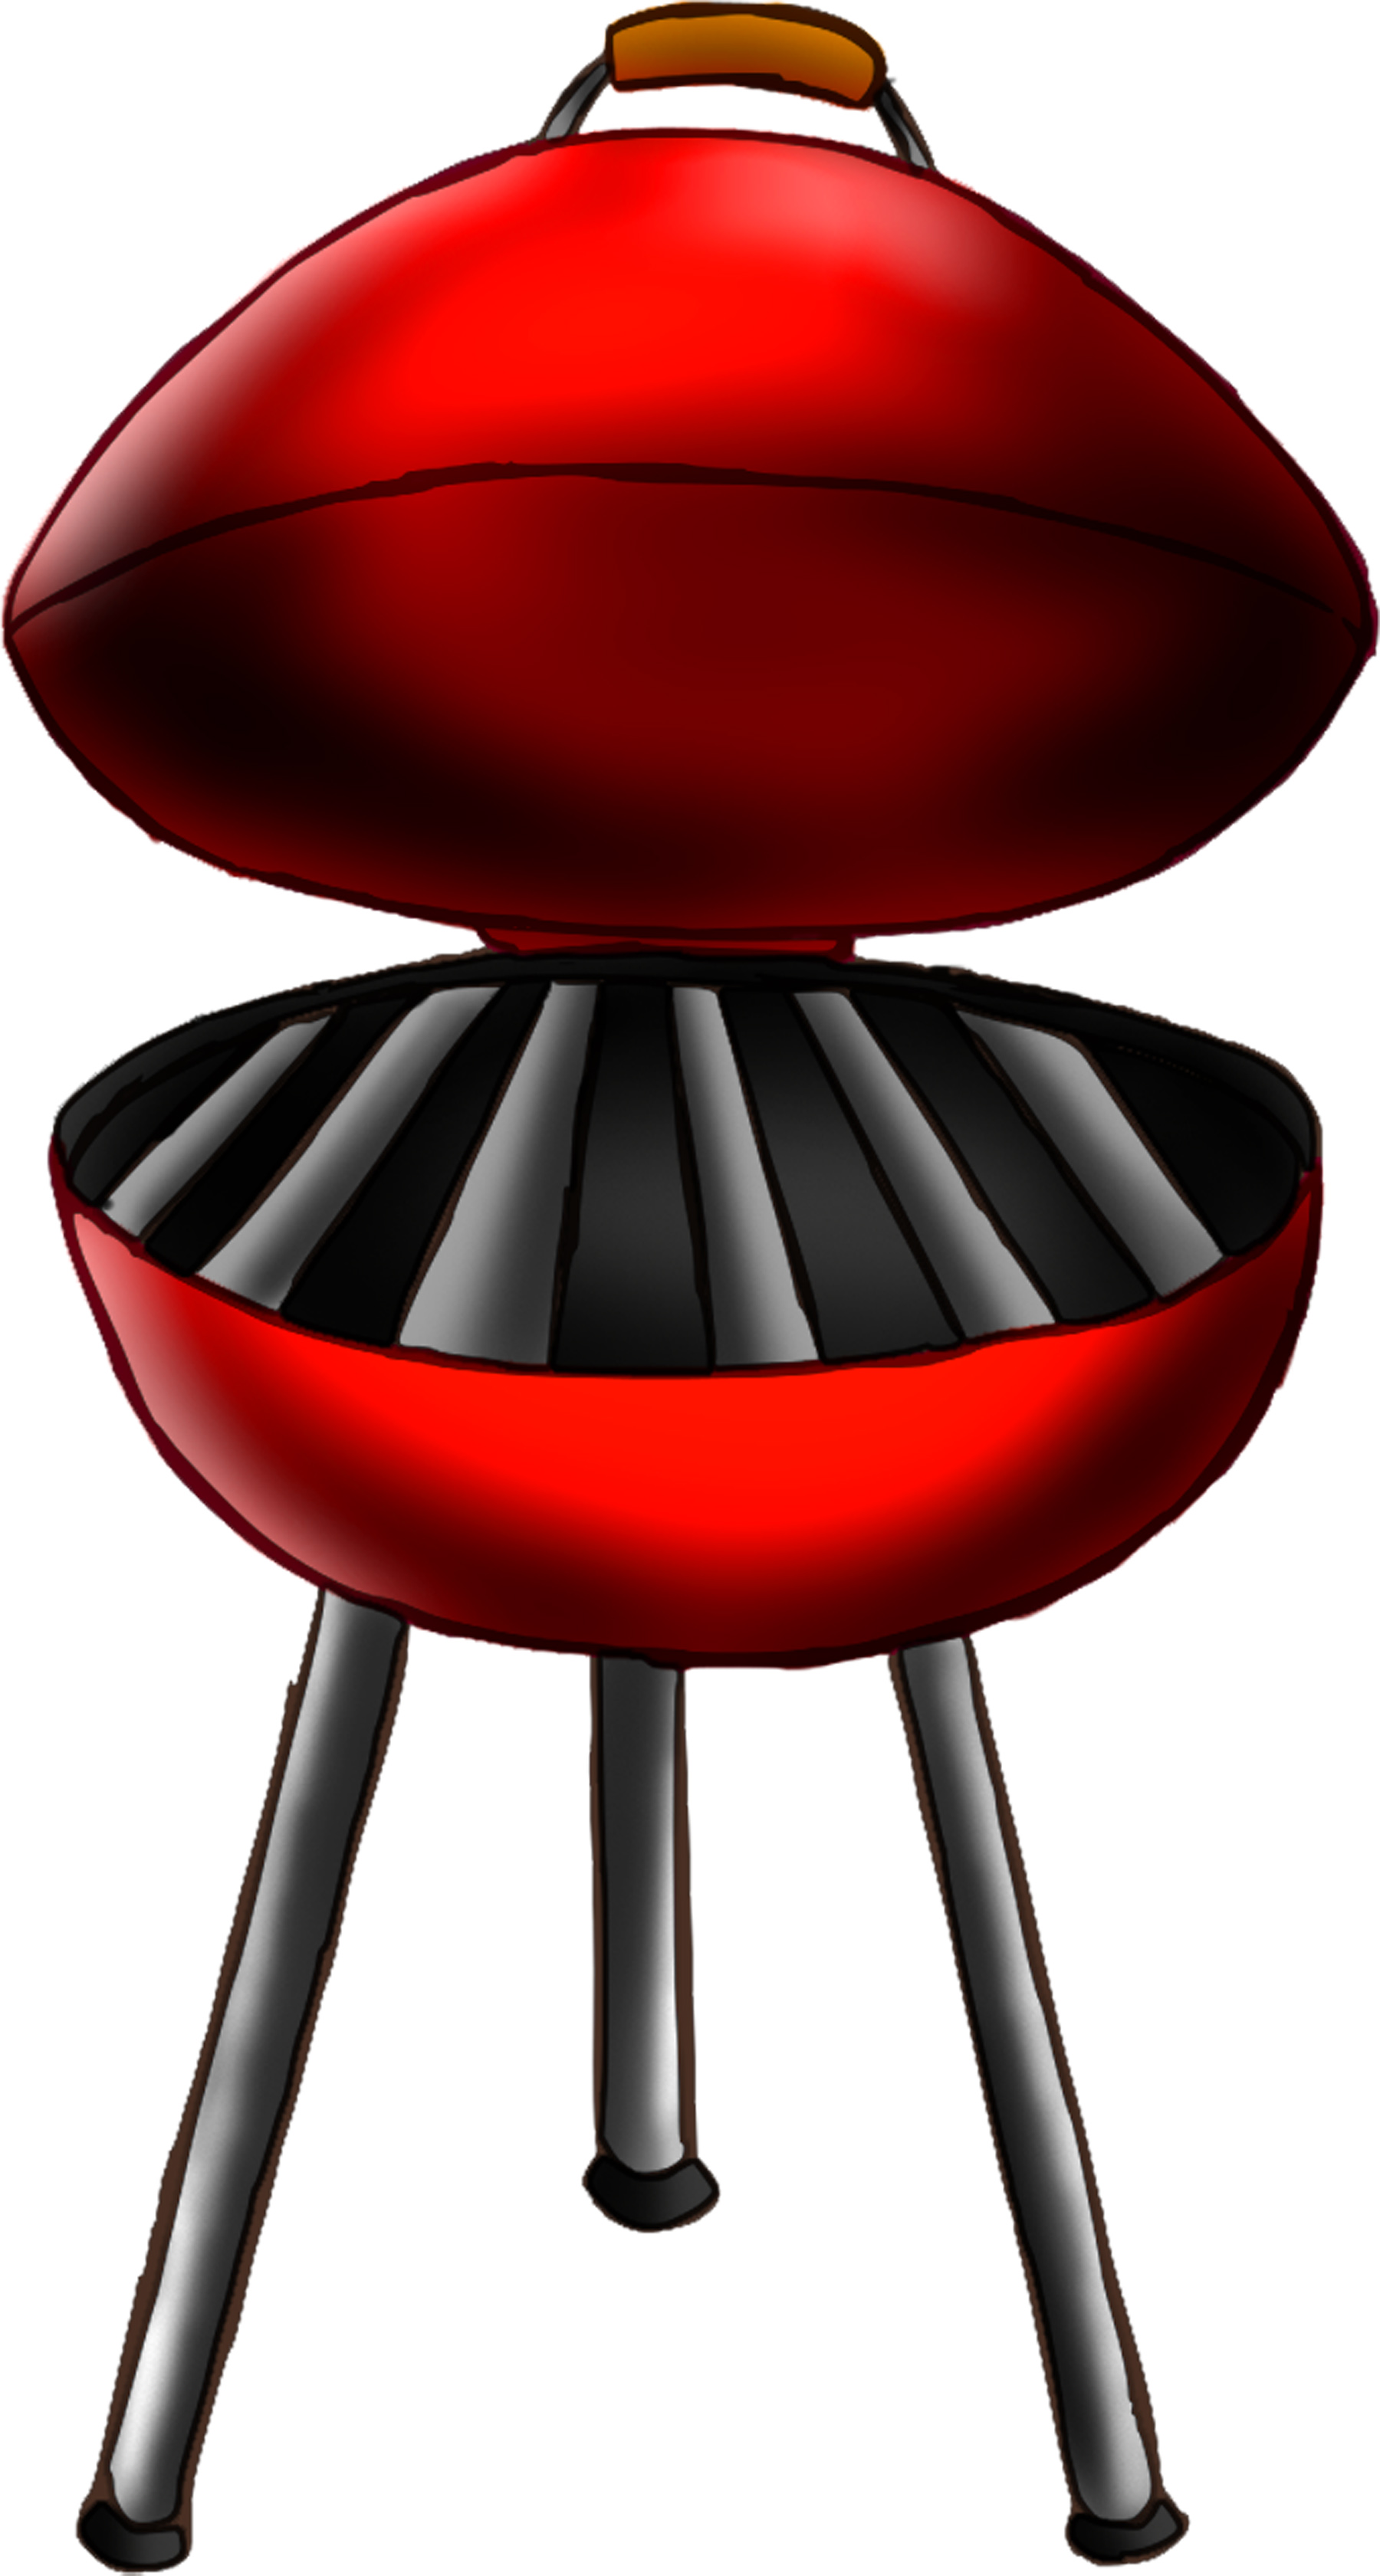 Free PNG Grill - 47964